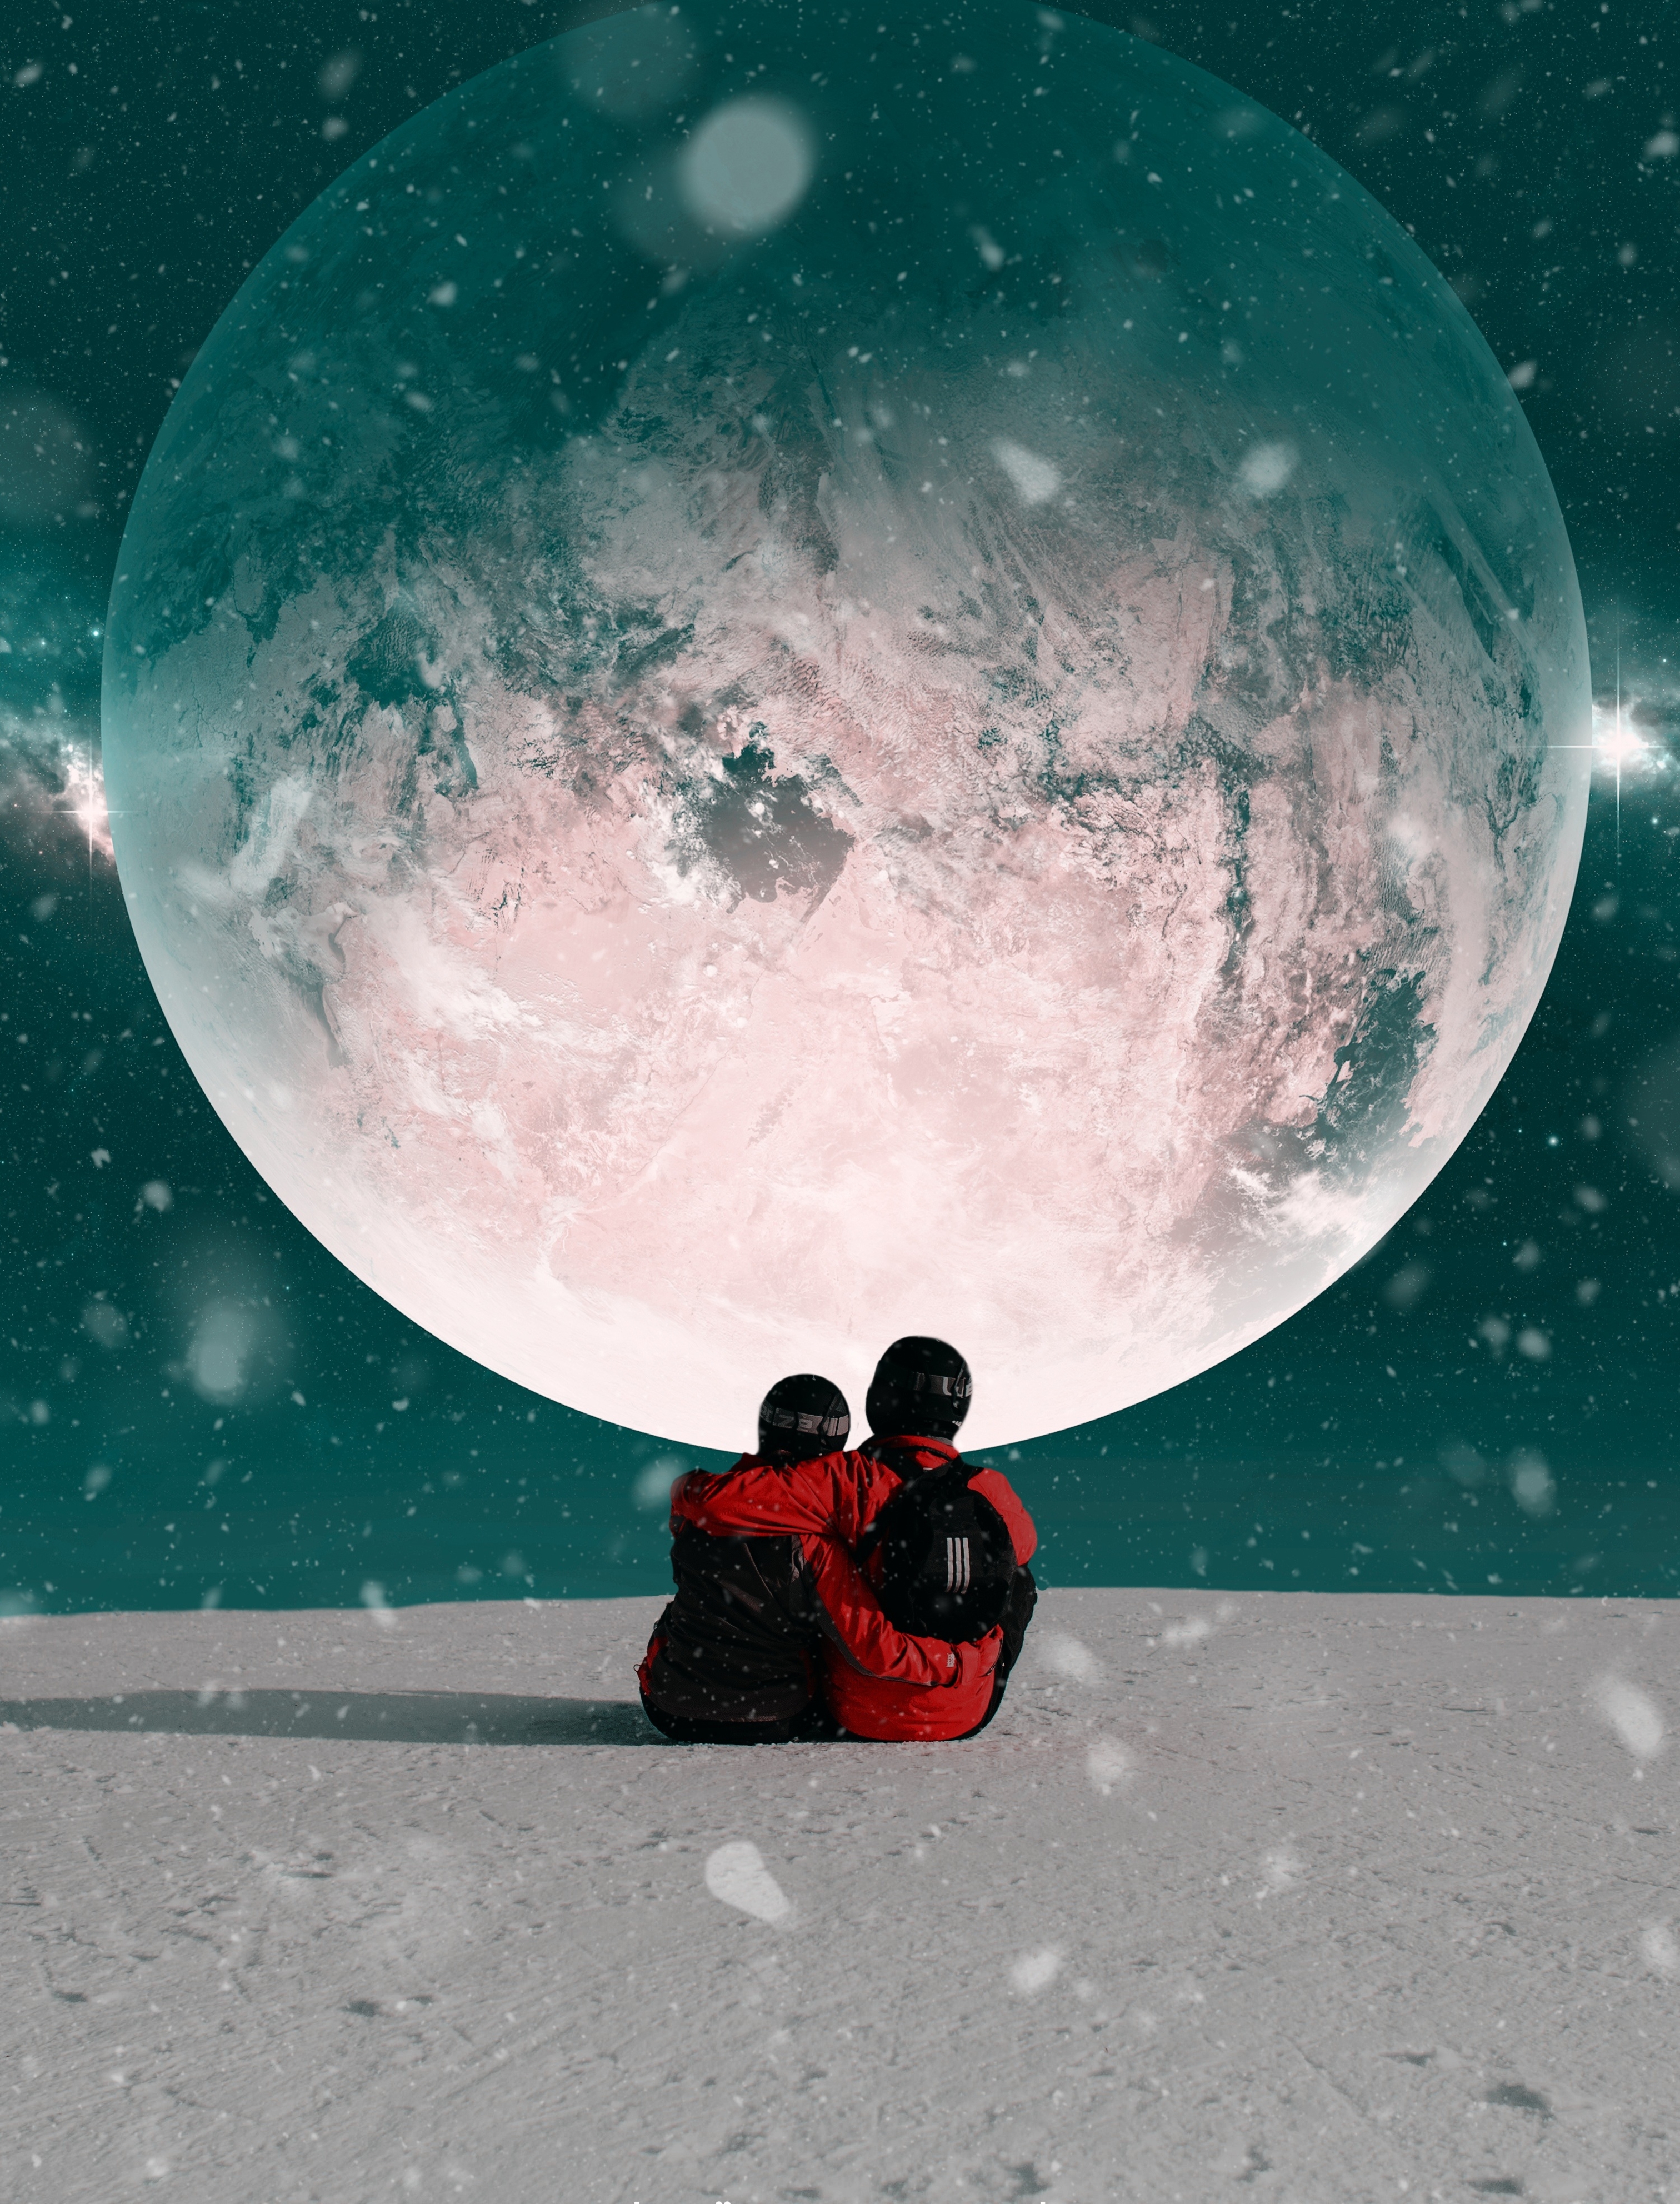 123409 download wallpaper love, universe, moon, snow, couple, pair, embrace screensavers and pictures for free